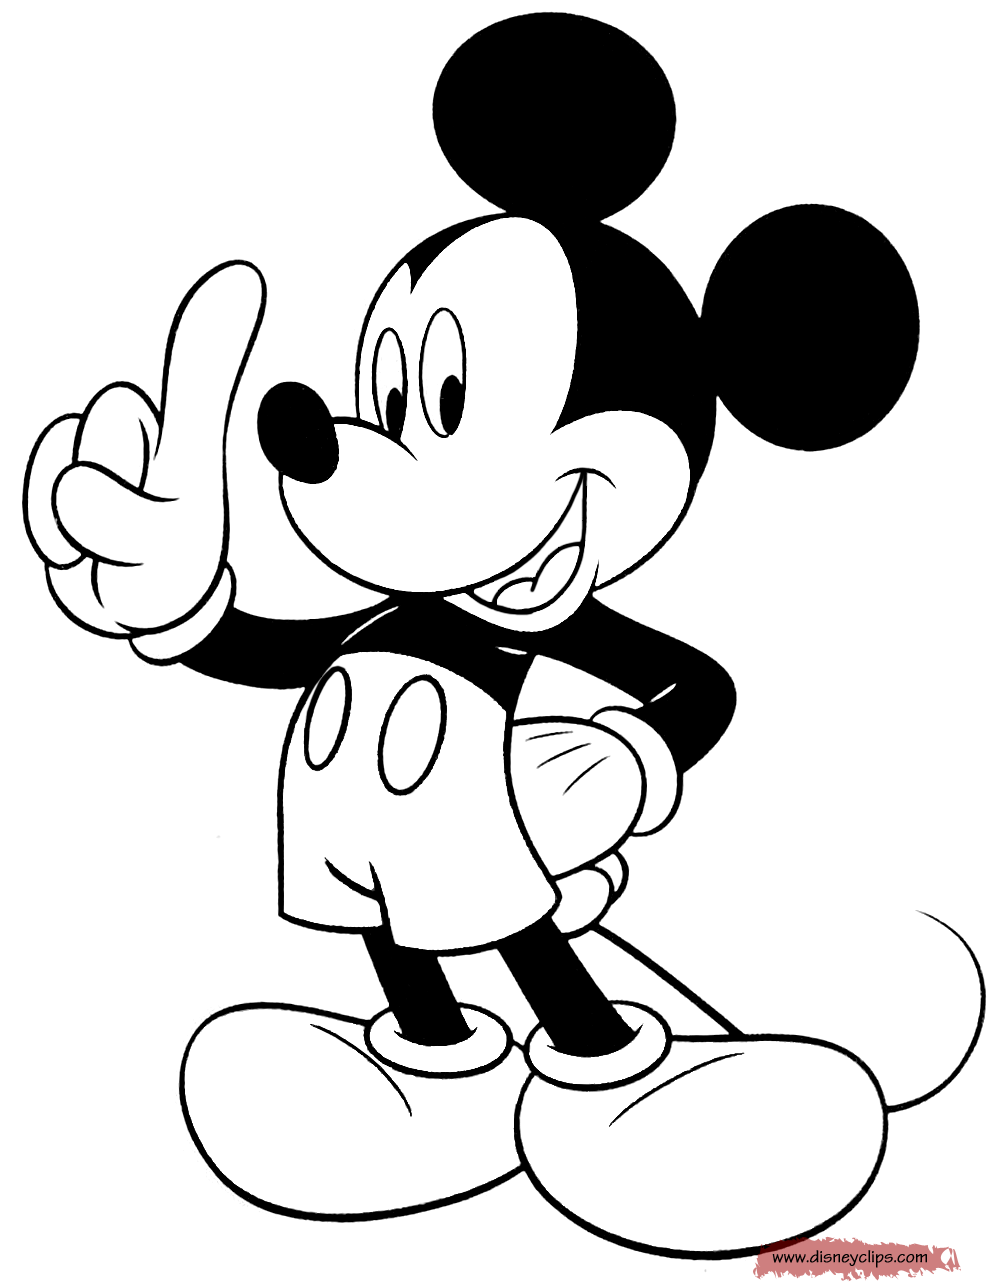 Download Mickey Mouse Printable Coloring Pages | Disney Coloring Book